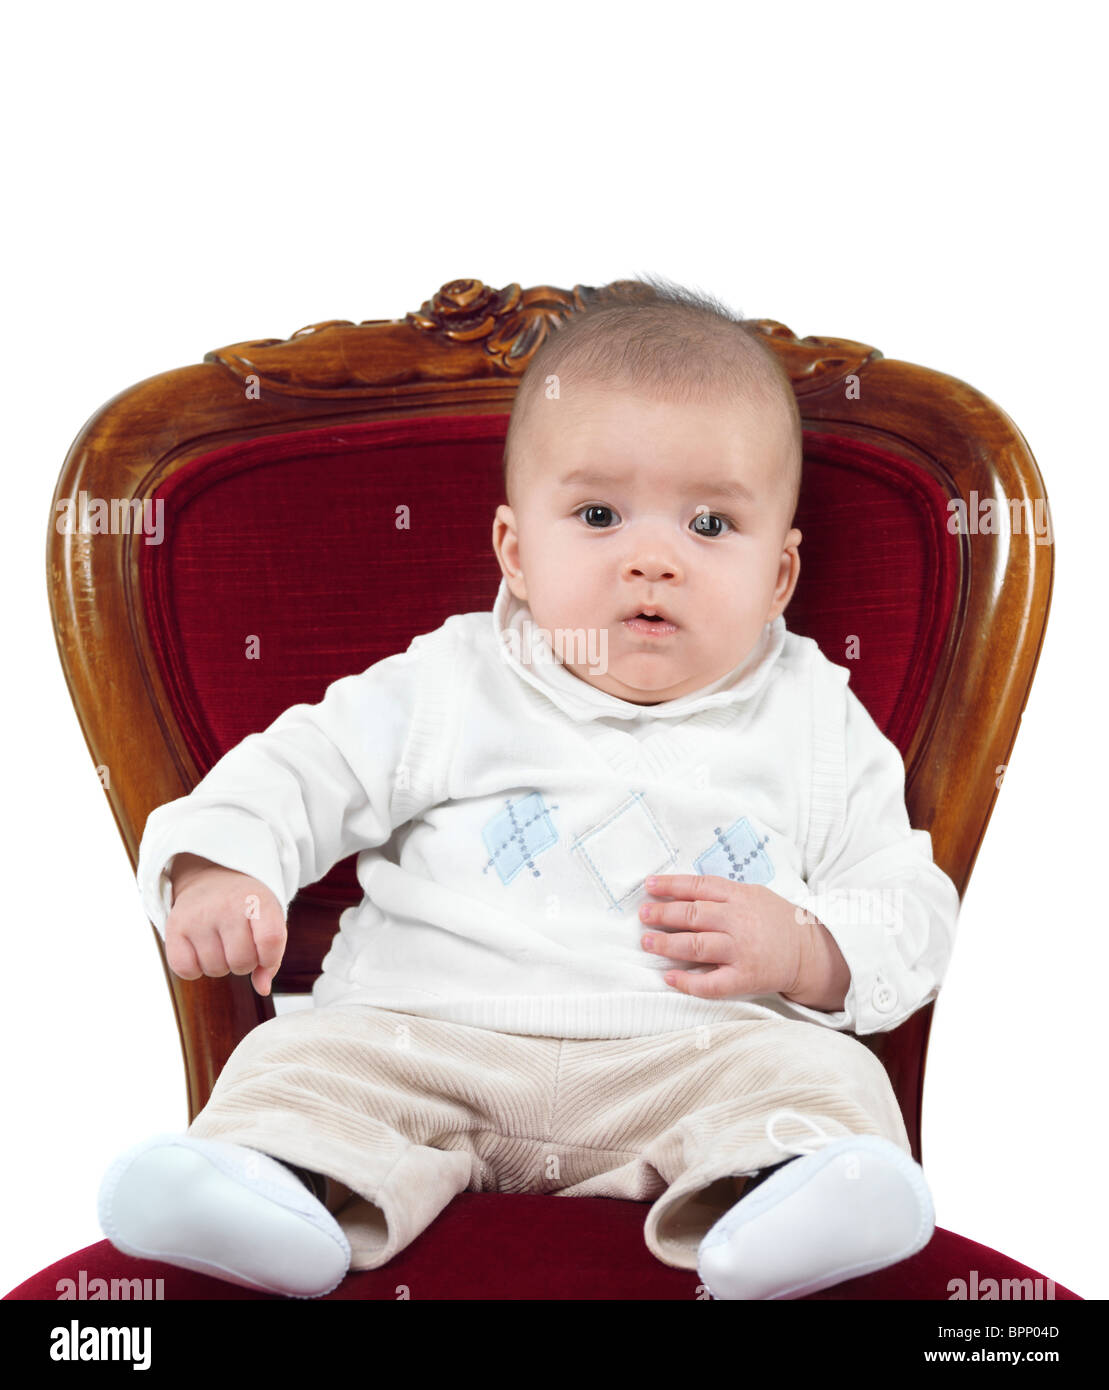 Humorous photo of a four month old baby boy sitting in a chair like a king on a throne. Isolated on white background. Stock Photo